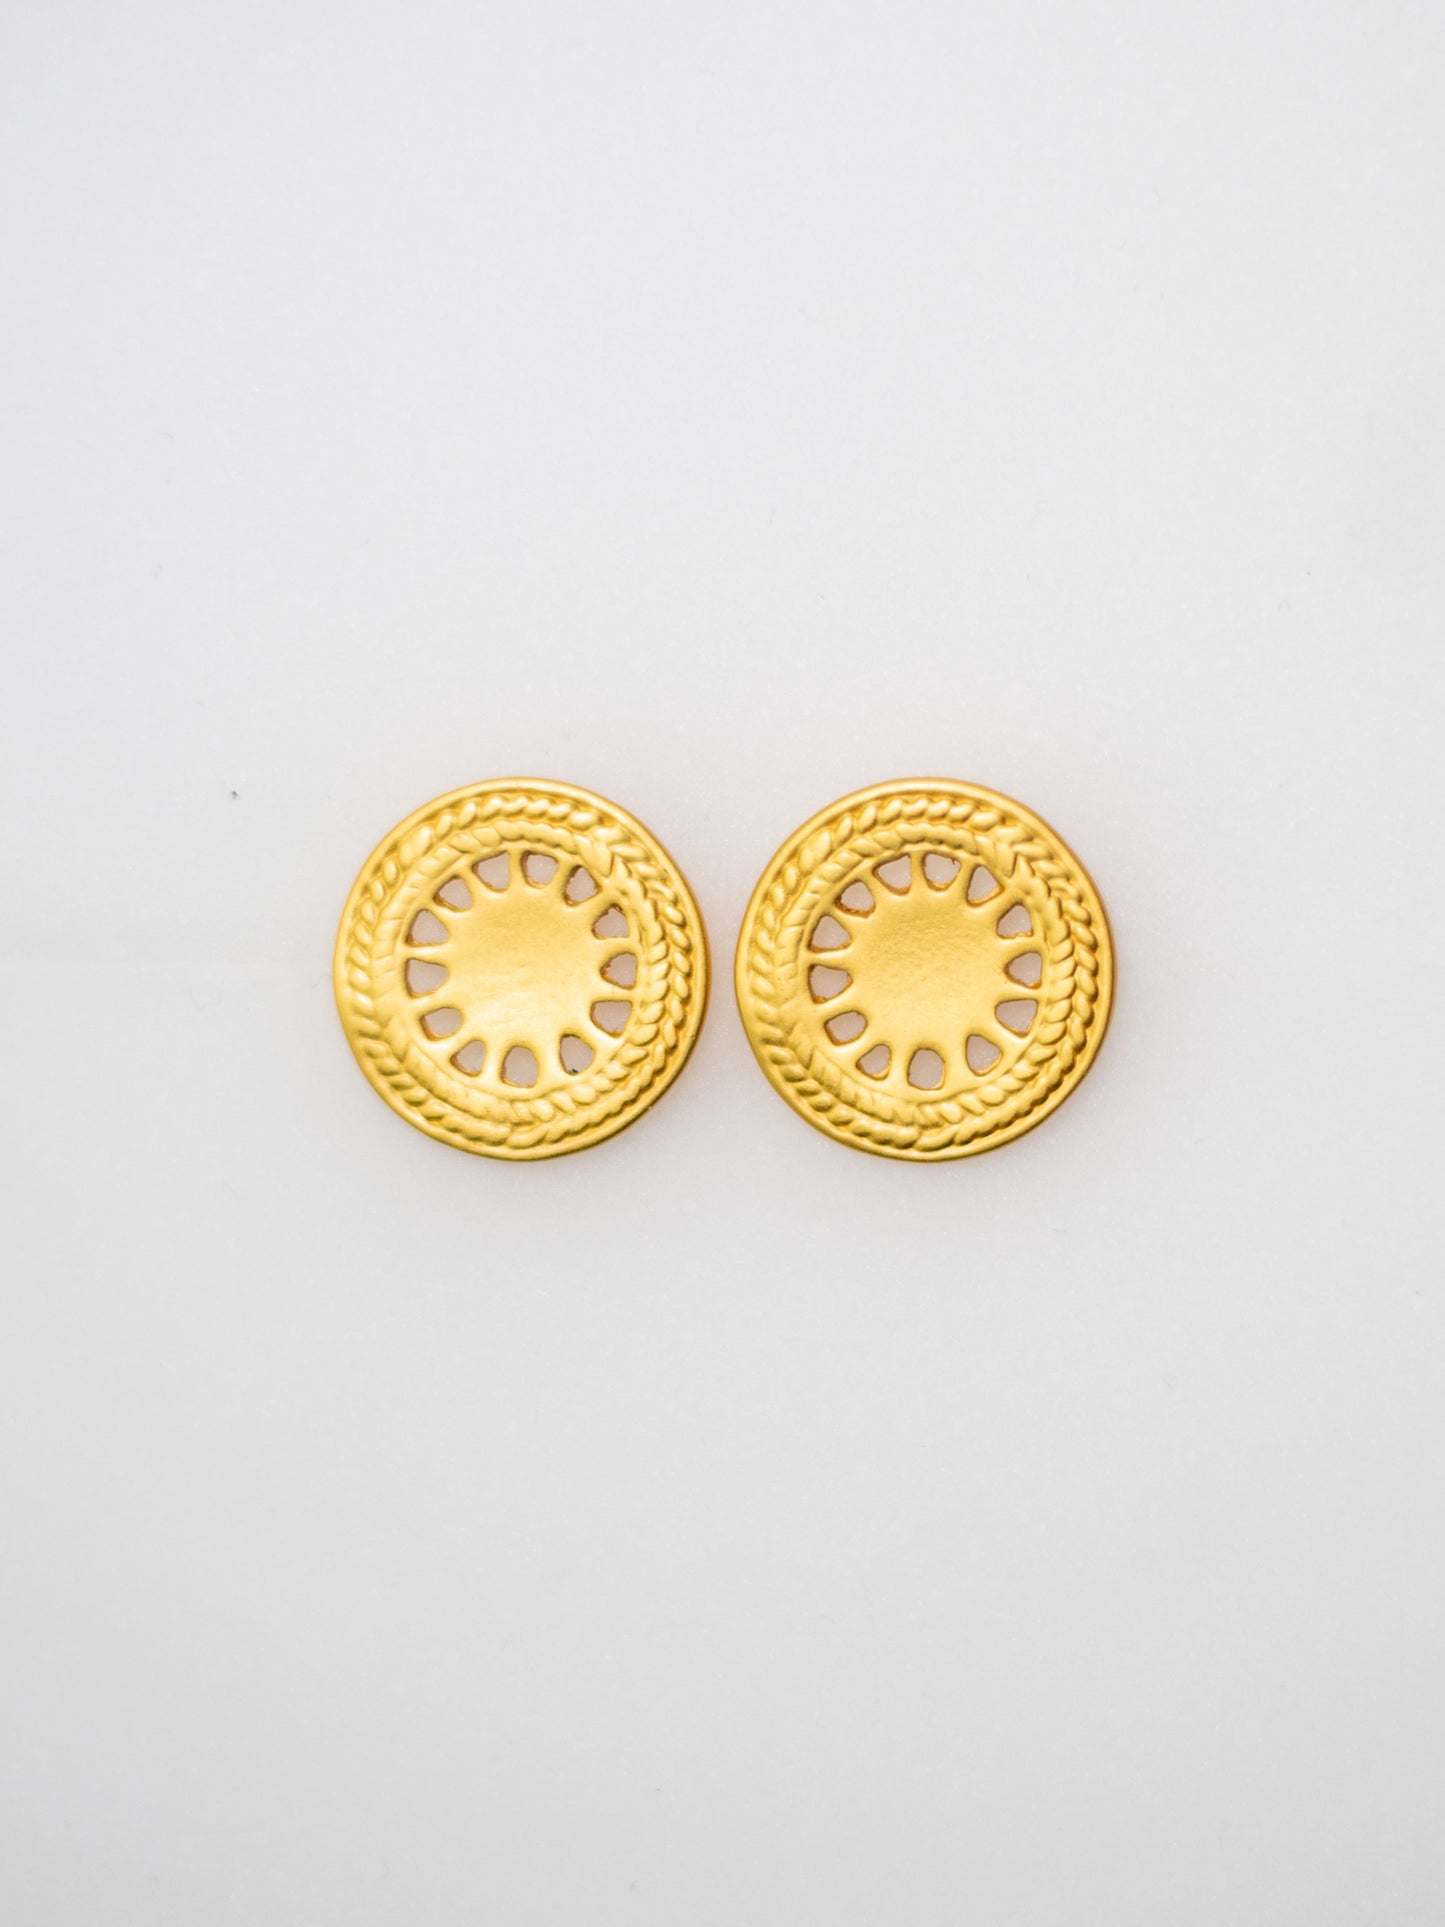 24K Gold Plated Pre-Columbian Muisca Pattern Round Earrings.